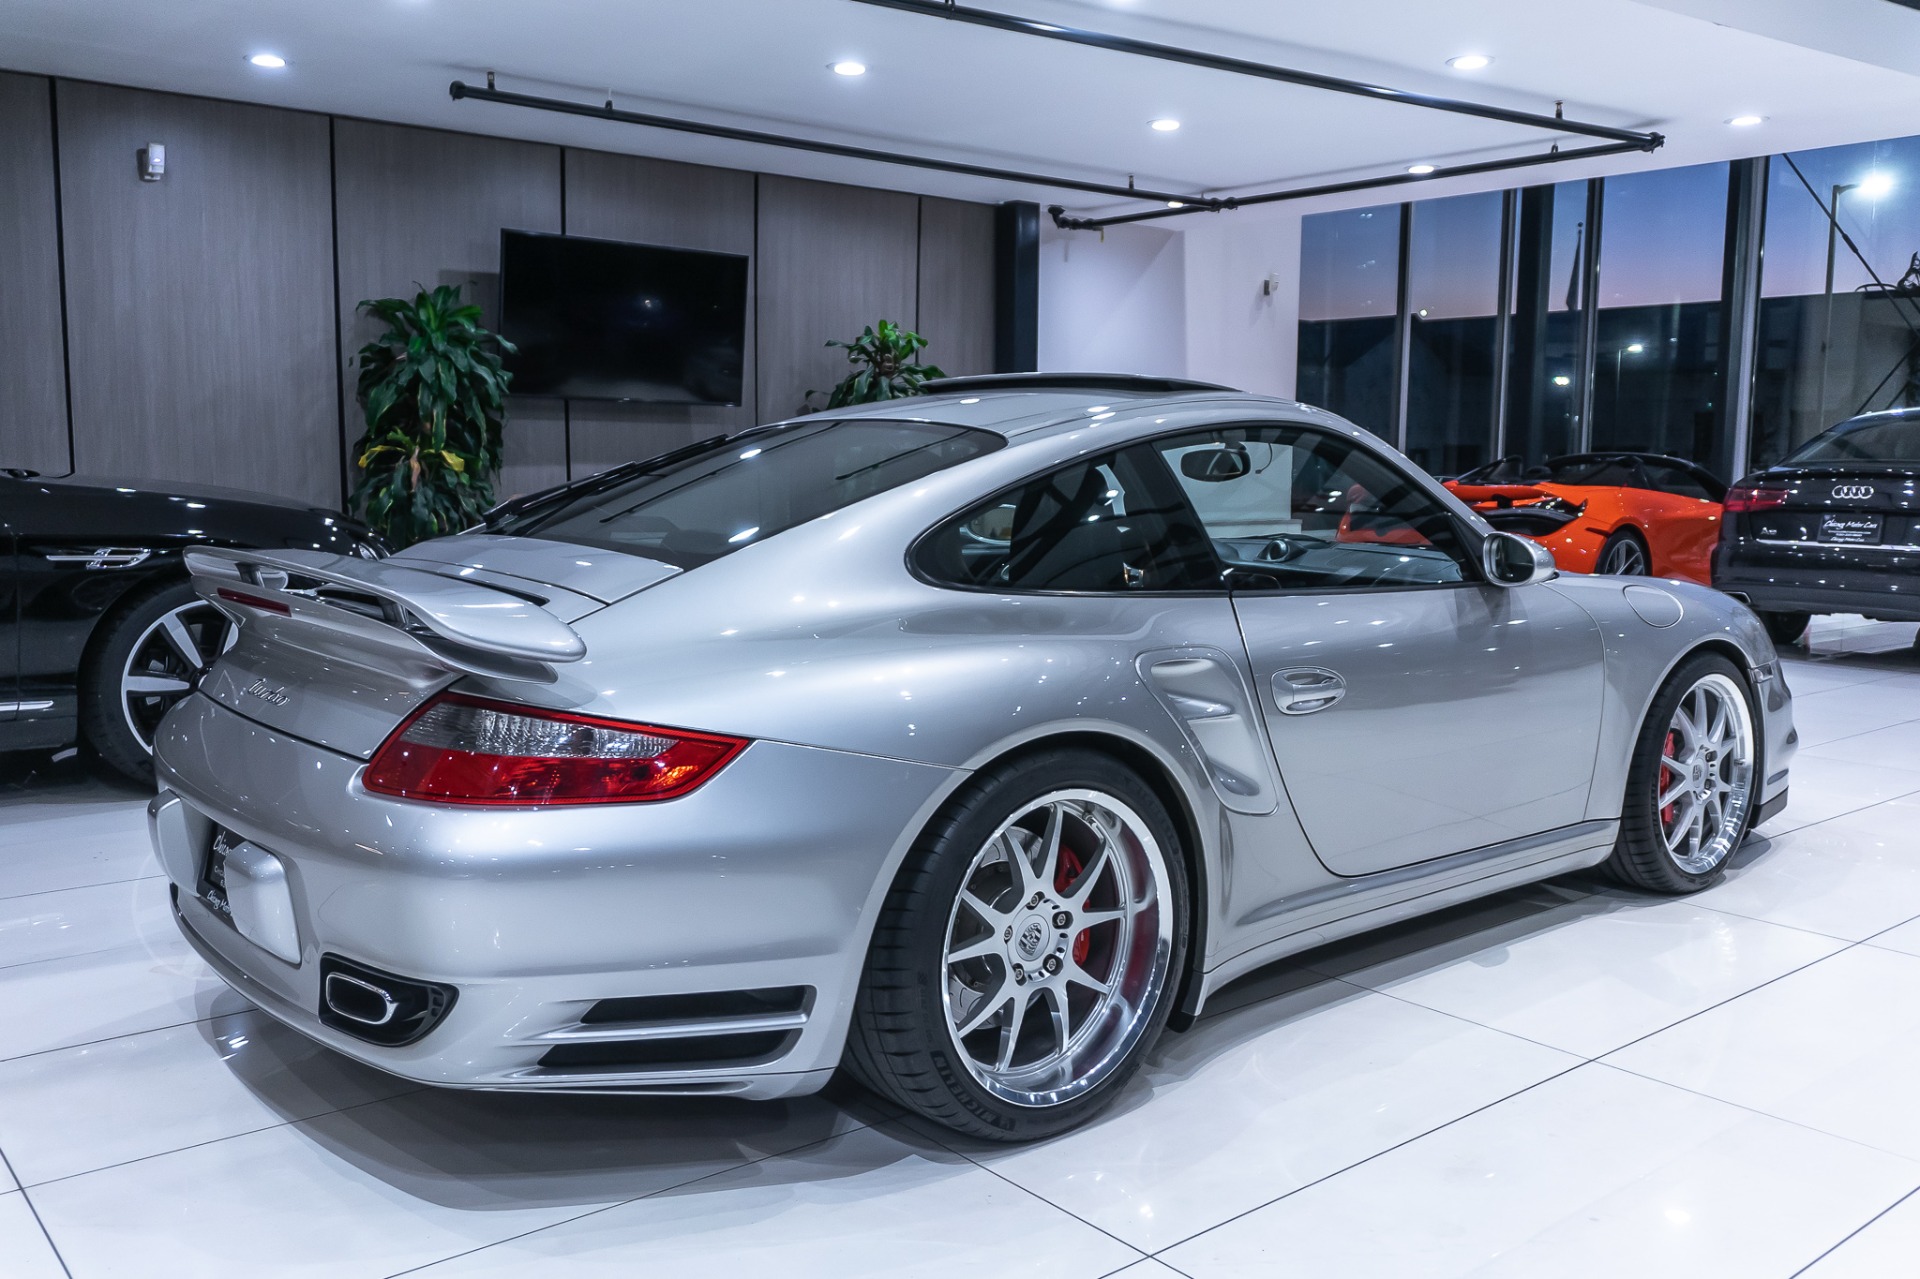 Used-2007-Porsche-911-Turbo-Coupe-6-Speed-Manual-Tastefully-Upgraded-Over-700hp-Serviced-With-Record